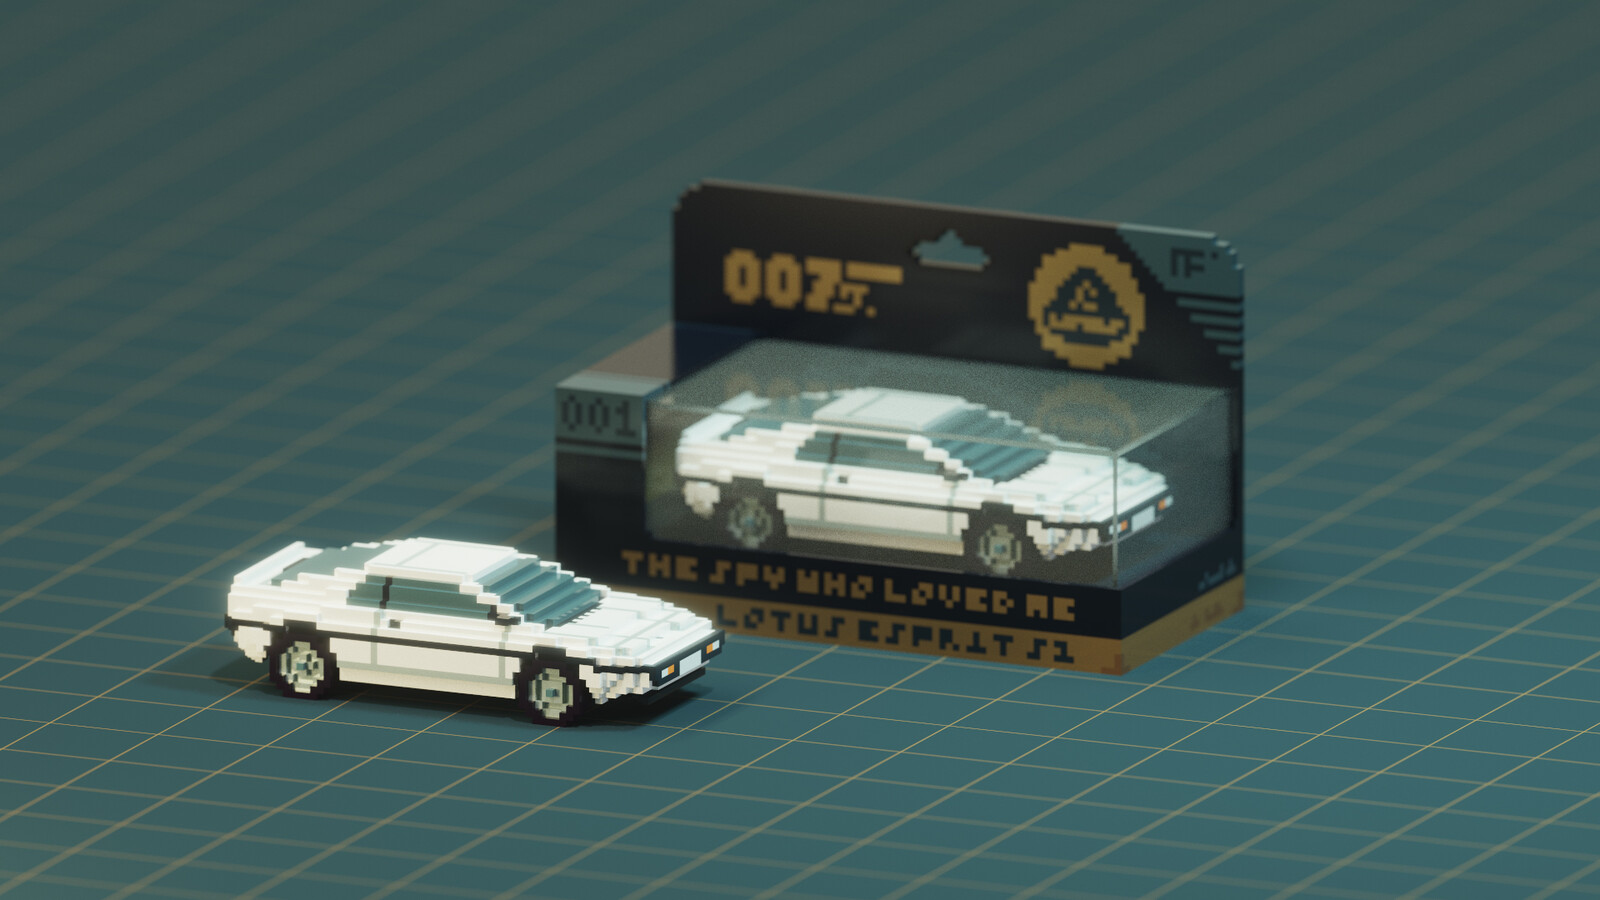 "Diecast" Lotus Esprit Car both inside and outside of packaging placed atop a modeling cutting mat.